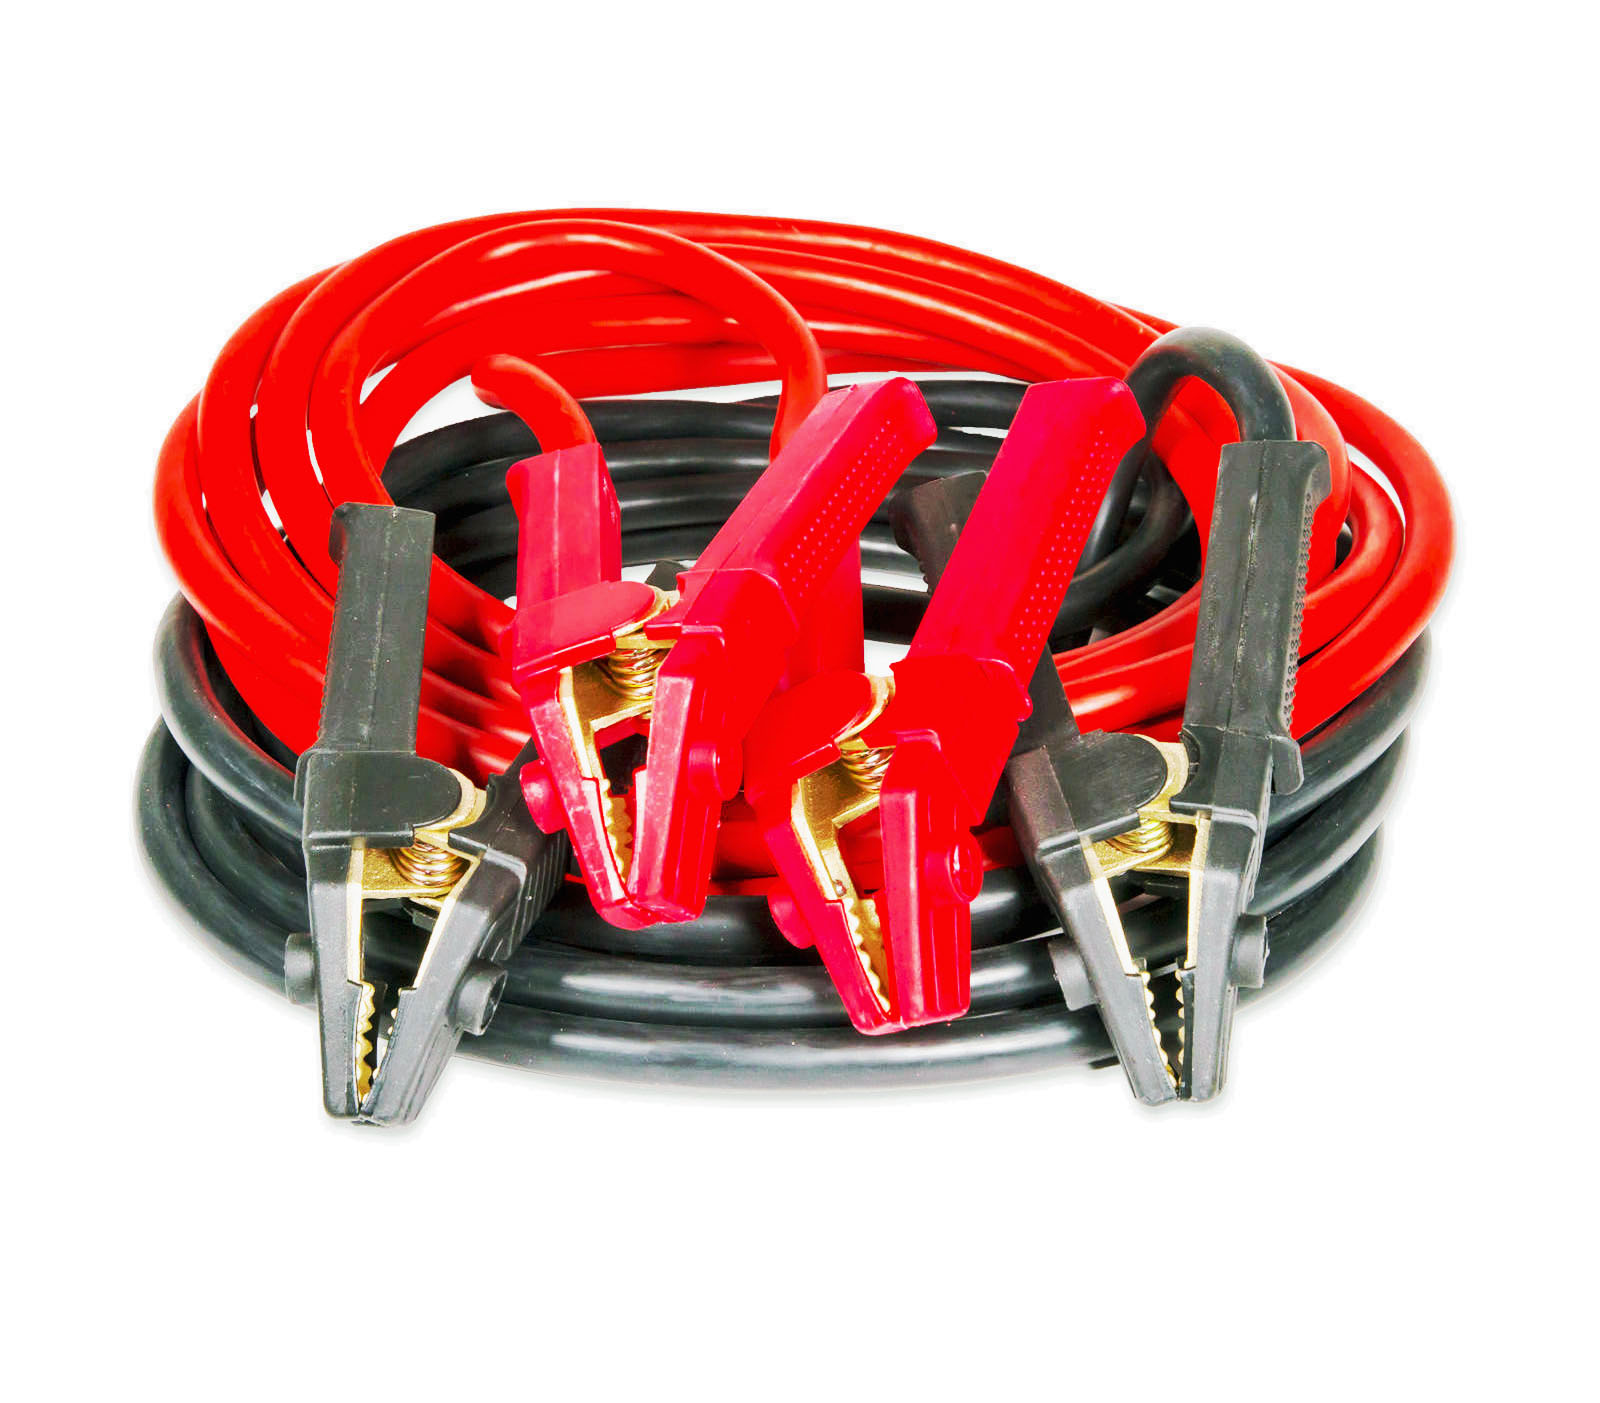 ▷ Jumper Land cable length for 1200A 6m & - available here! Nakatanenga Offroad 4x4-Equipment Outdoor max. Rover, 